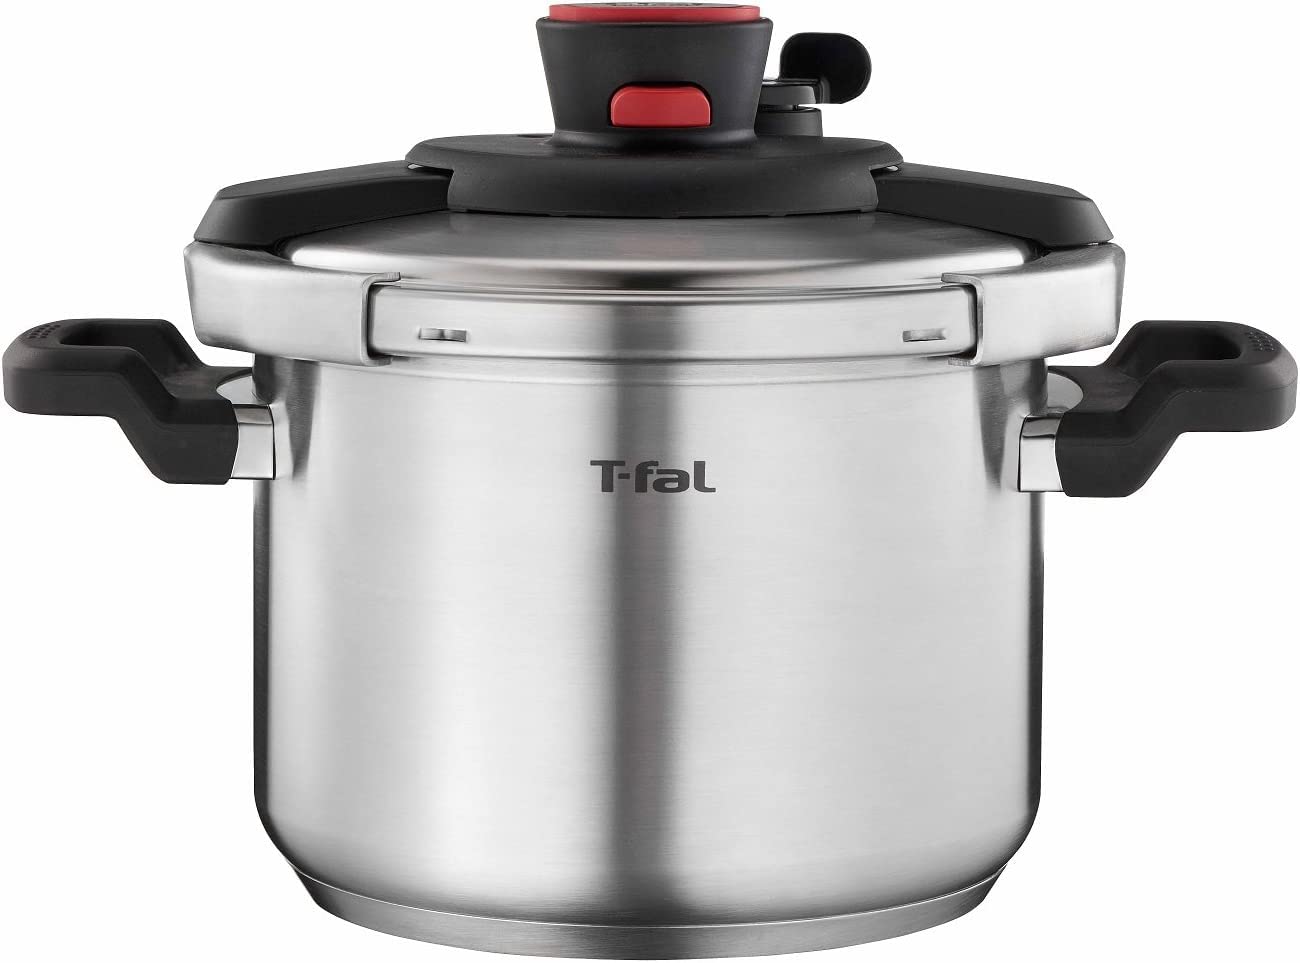 T-fal Pressure Cooker, Pressure Canner with Pressure Co...